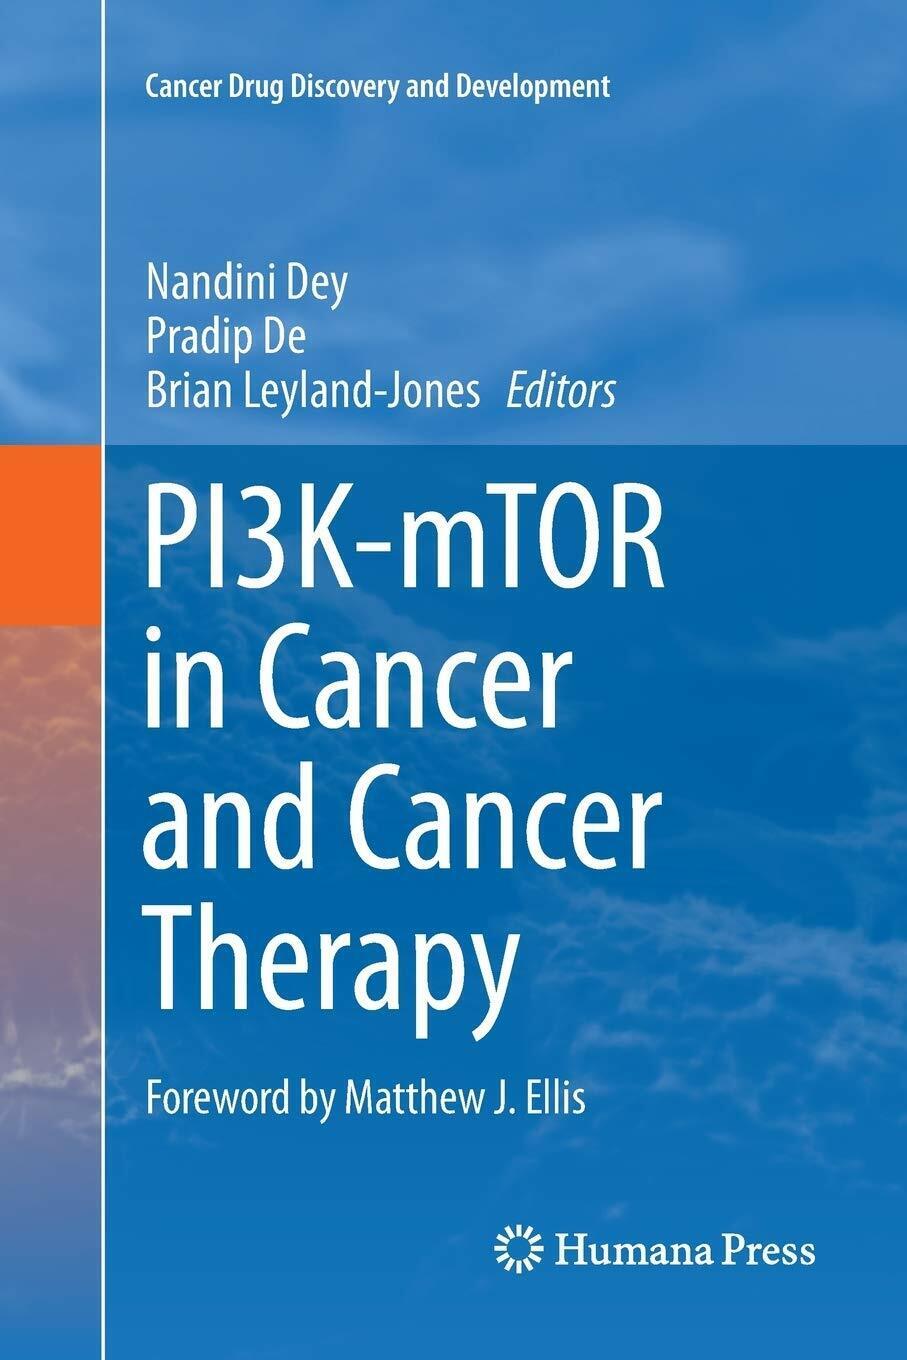 PI3K-mTOR in Cancer and Cancer Therapy - Nandini Dey - Springer, 2018